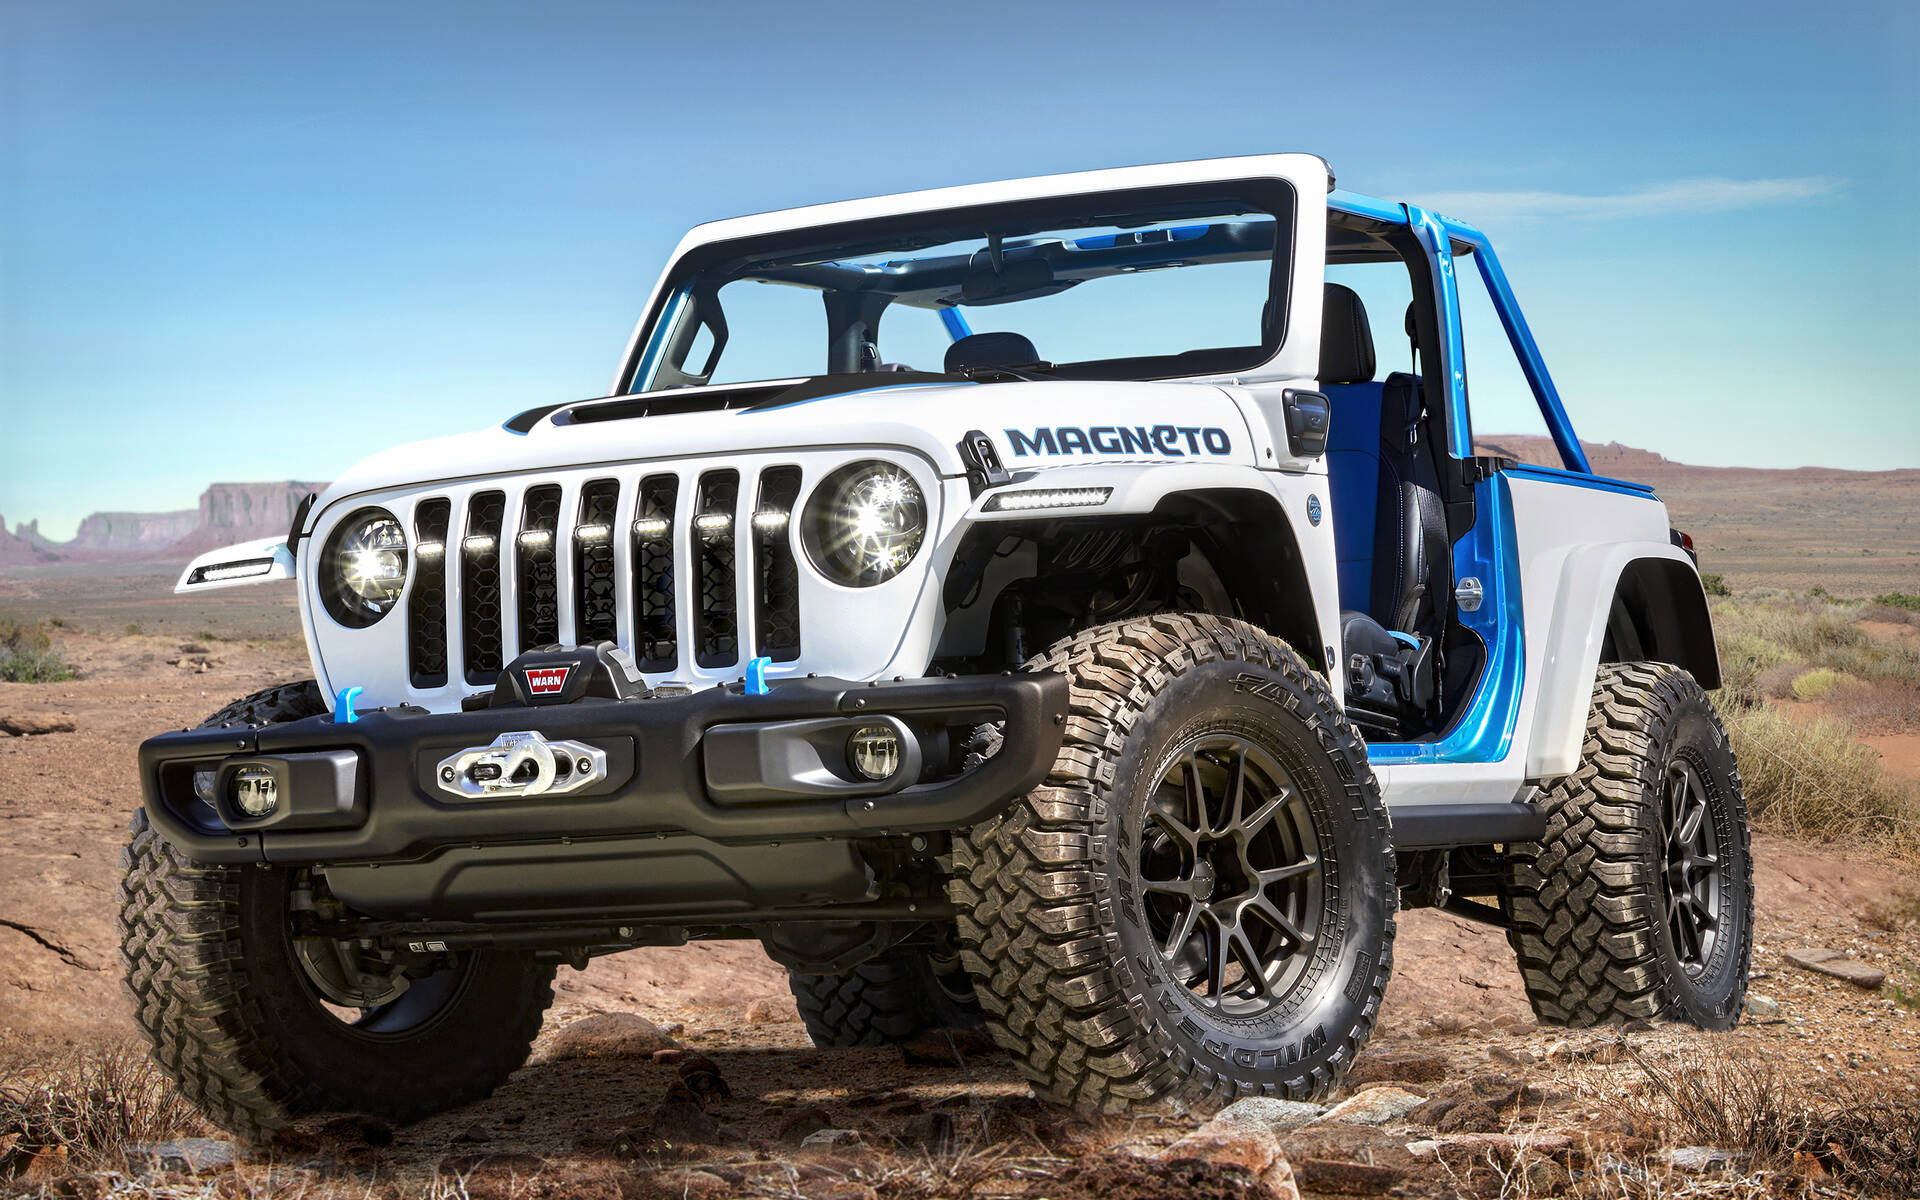 Jeep Magneto Concept Unveiled as Fully Electric Wrangler - The Car Guide